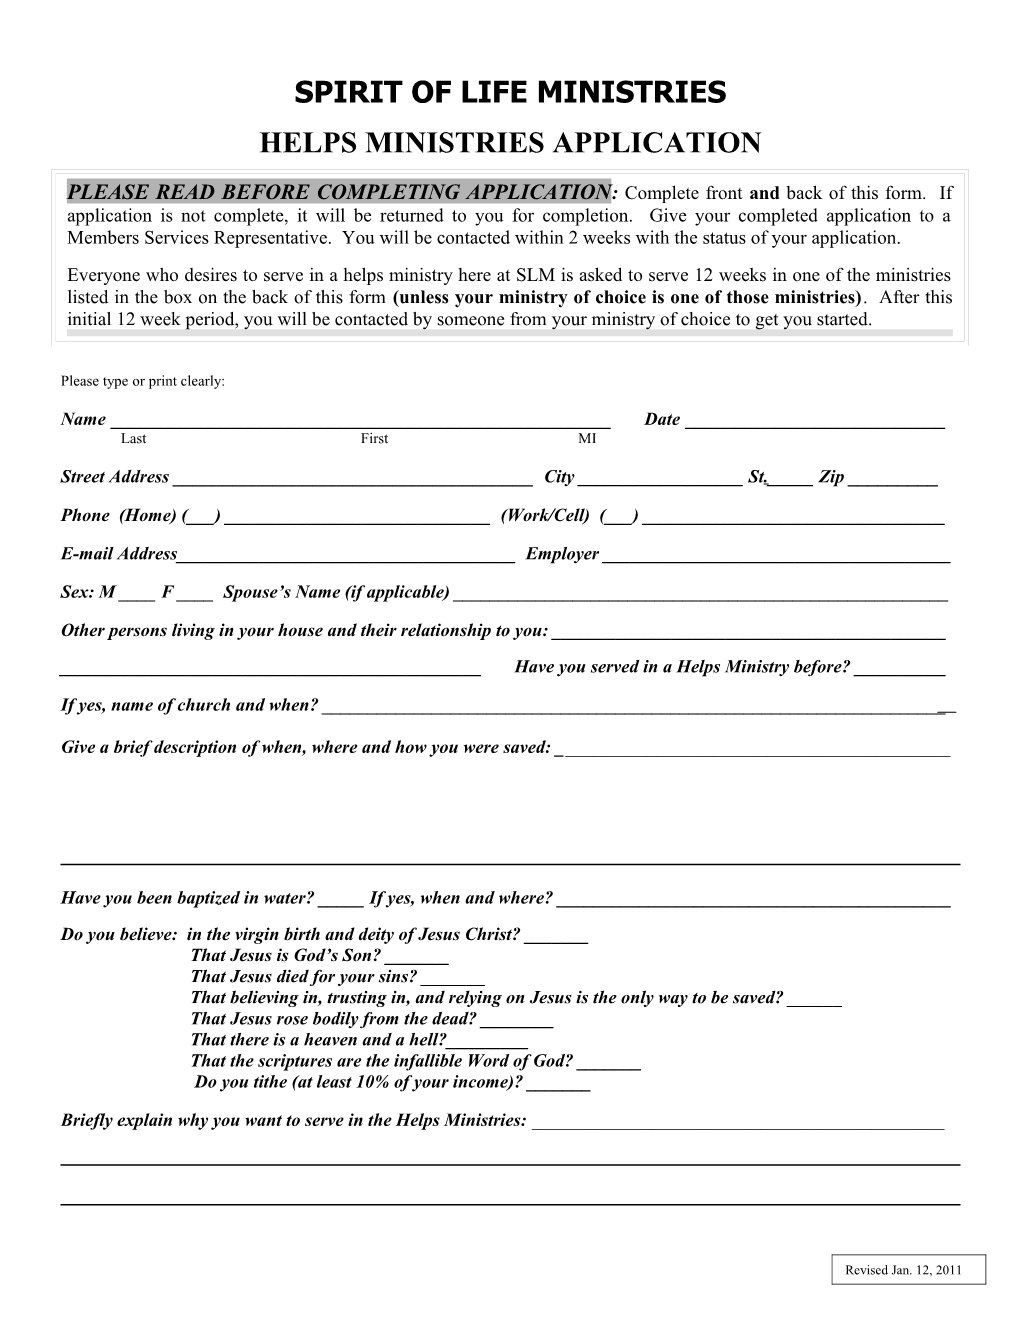 Helps Ministries Application